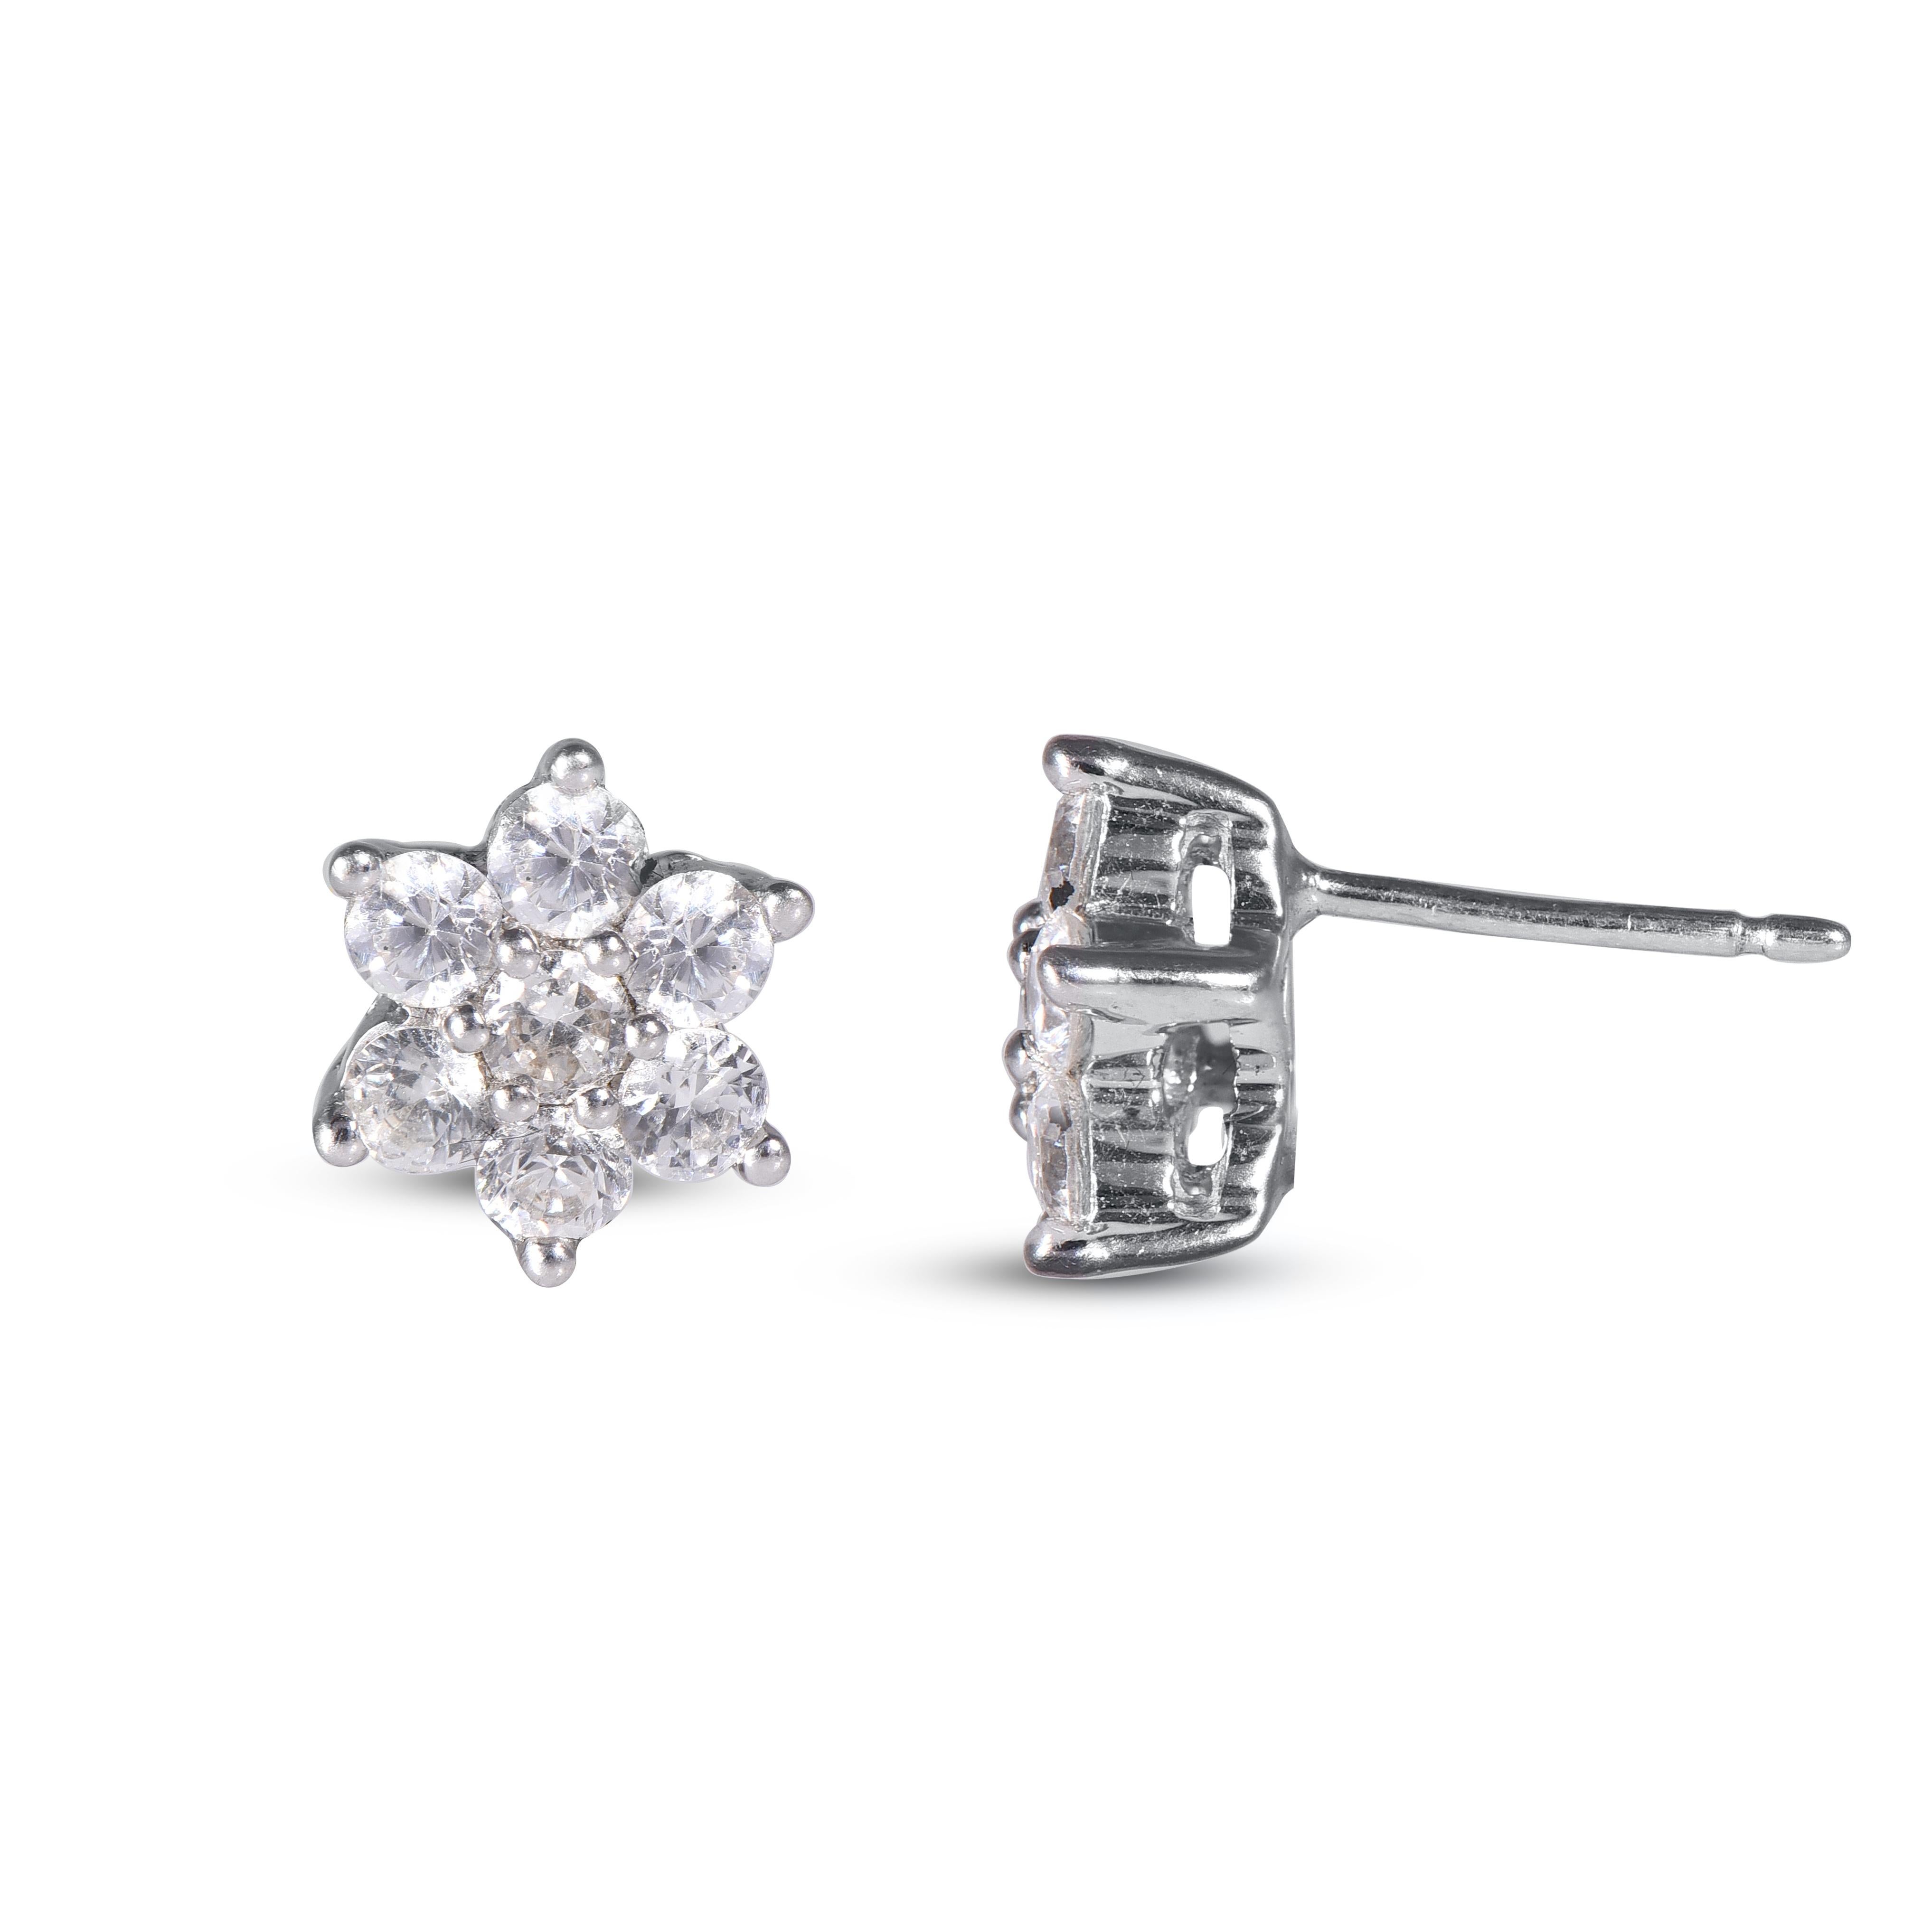 18 Karat White Gold Composite Diamond Stud Earrings With 14 Round Brilliant Diamonds timeless Diamond cluster stud earrings have 1.00 Carats of Round Brilliant set in prong setting, H-I color SI1-2 clarity. These sparkling stud earrings secure